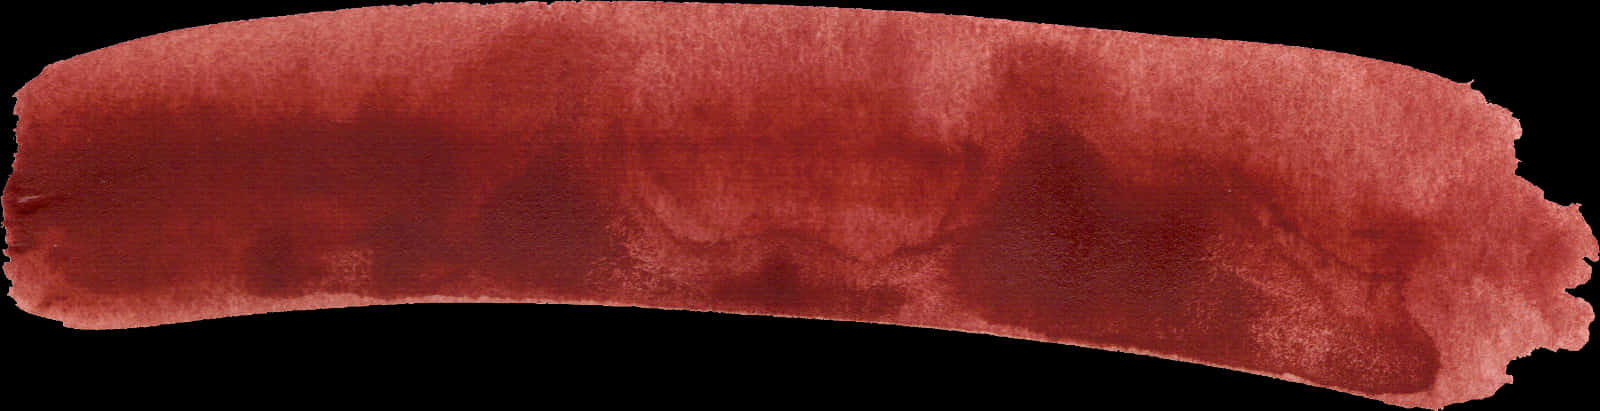 A Red Rectangular Object With Black Background